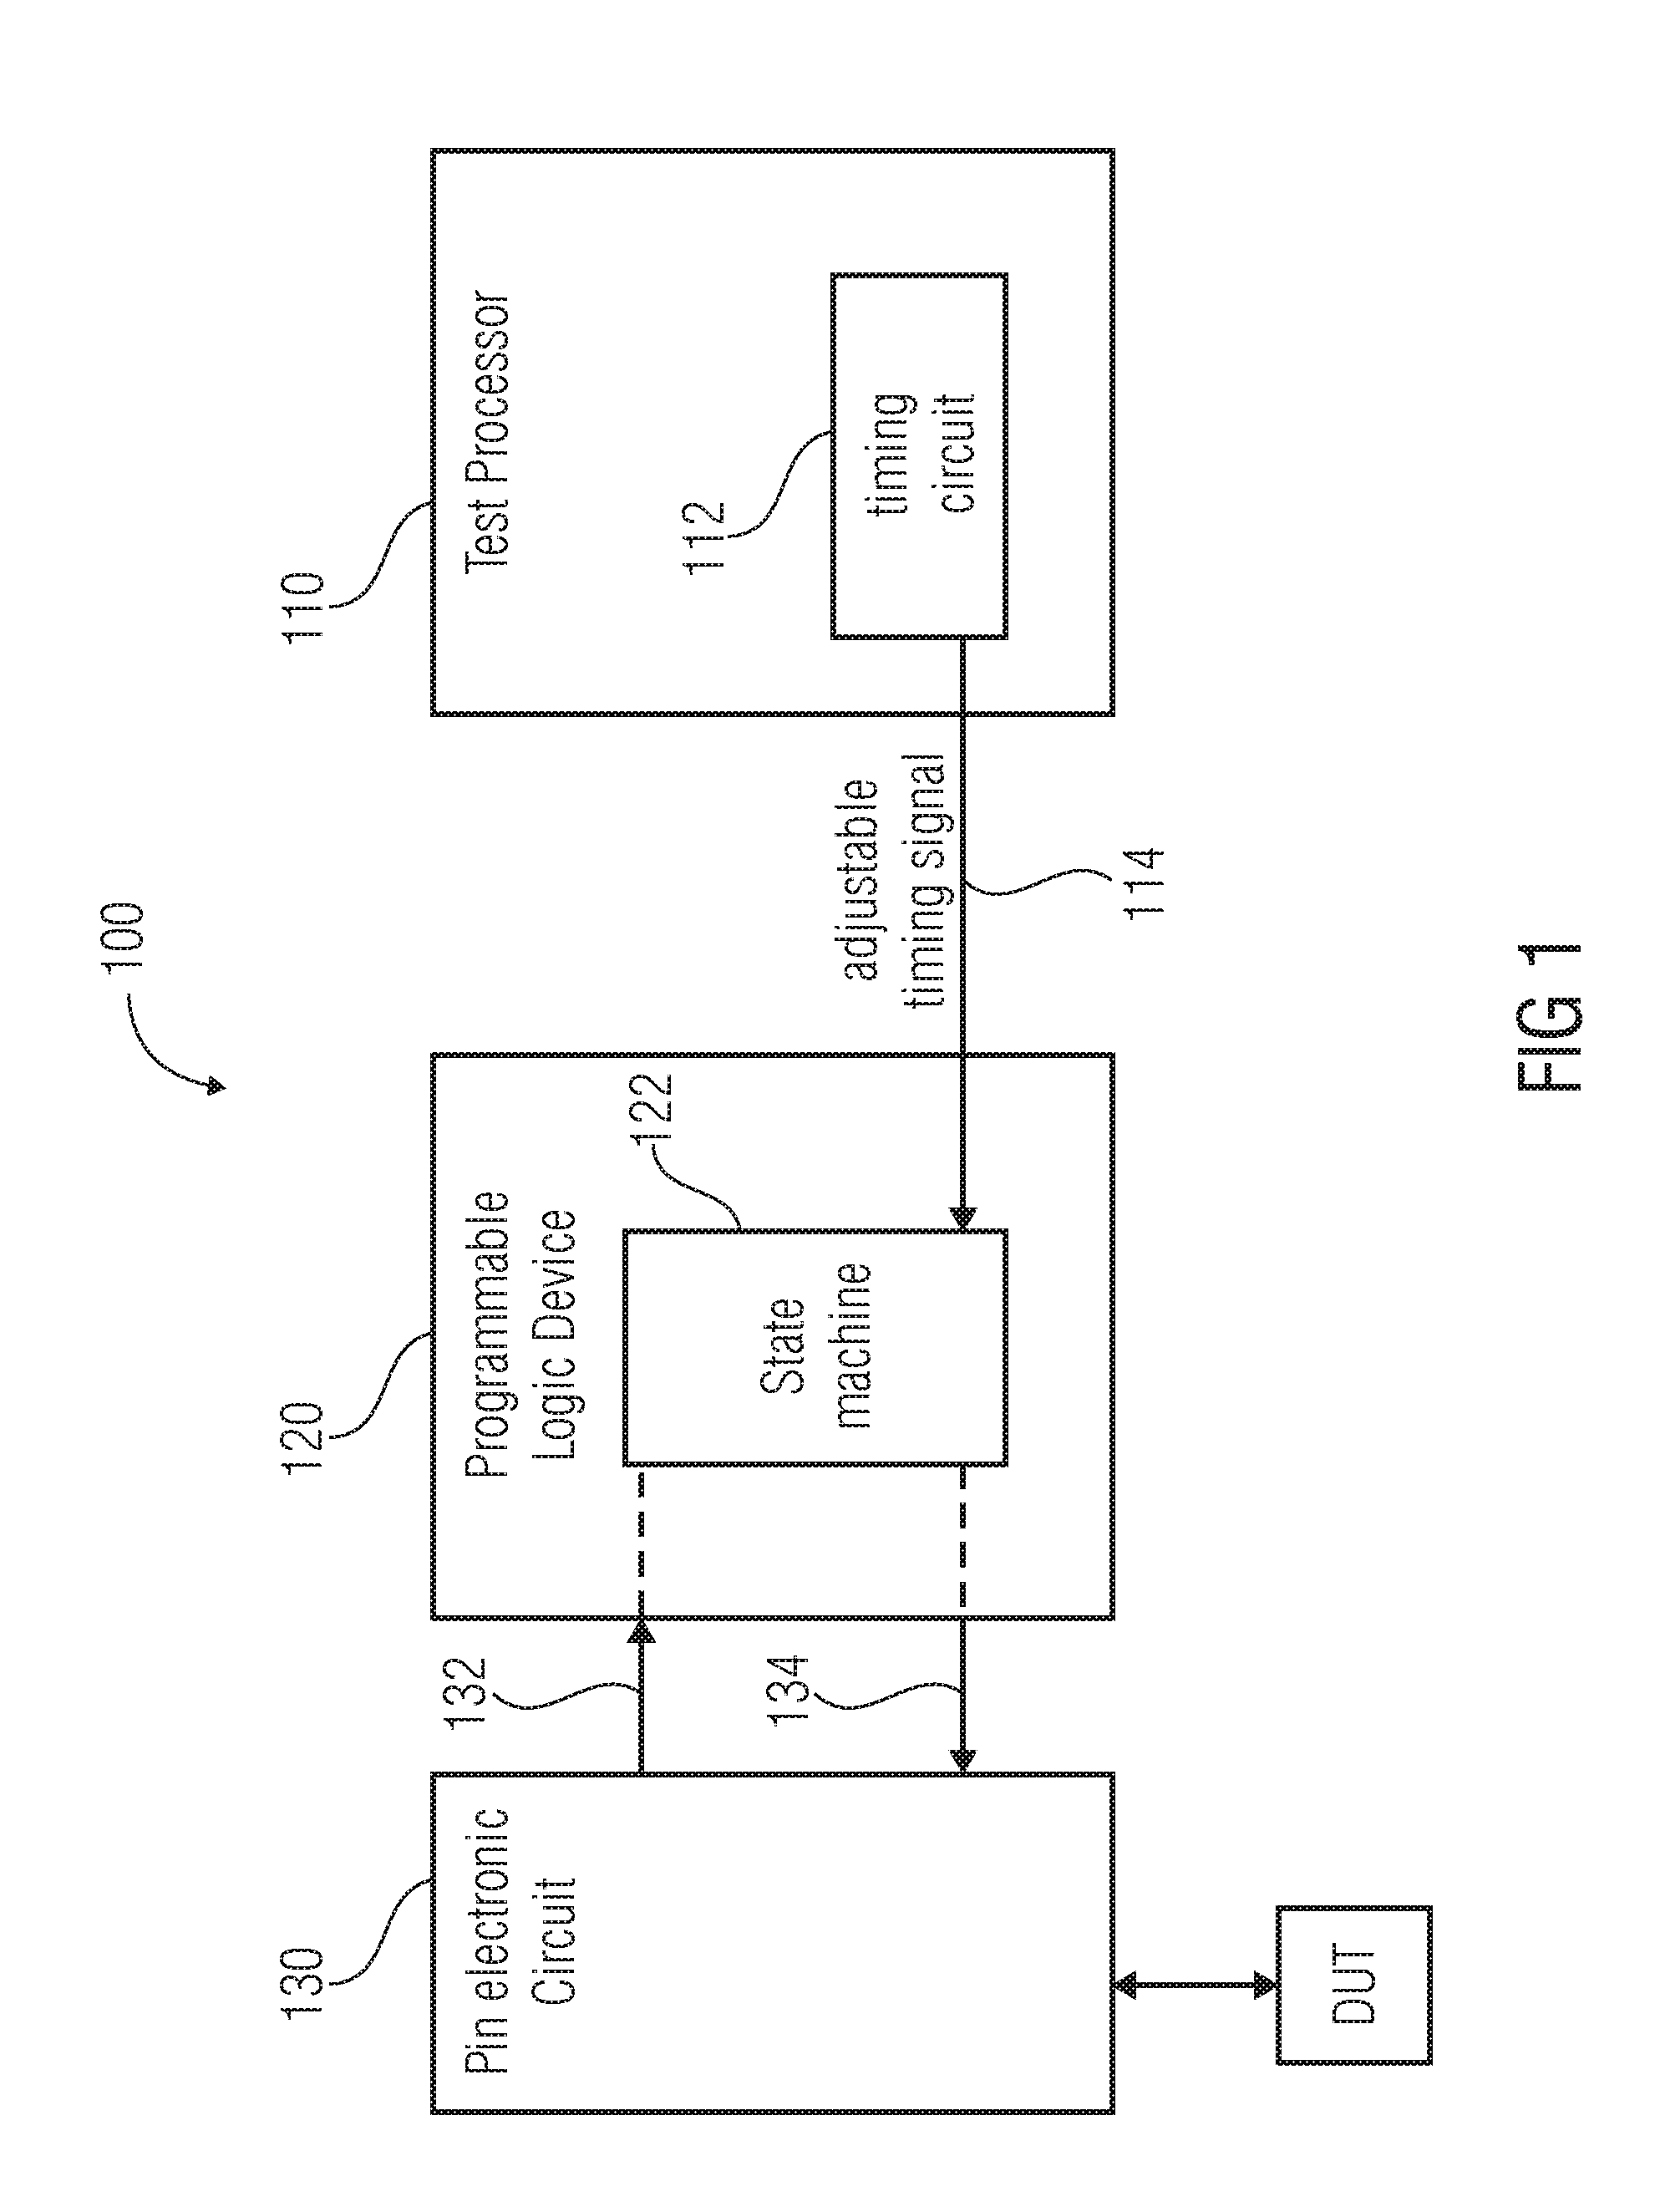 Re-configurable test circuit, method for operating an automated test equipment, apparatus, method and computer program for setting up an automated test equipment